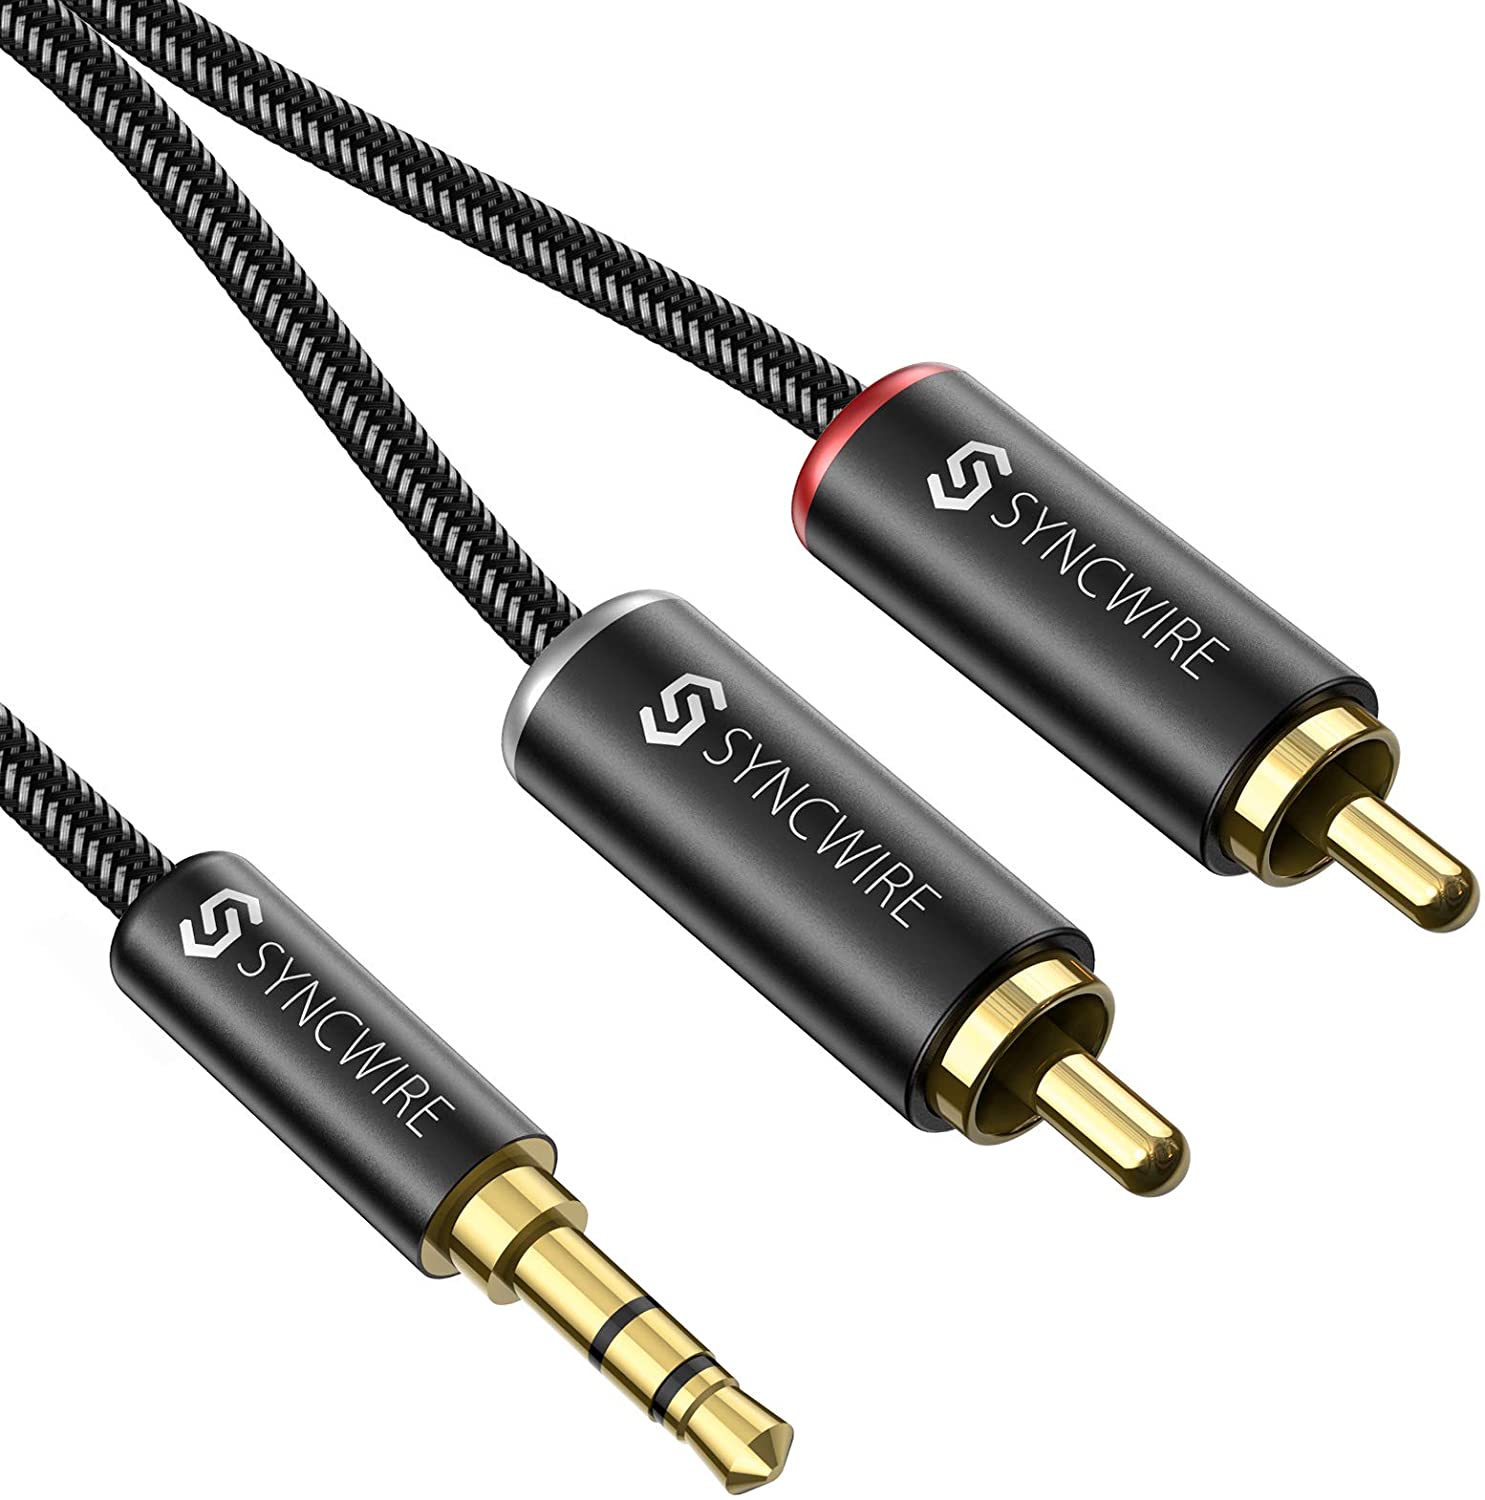 Best Coaxial Speaker Cable